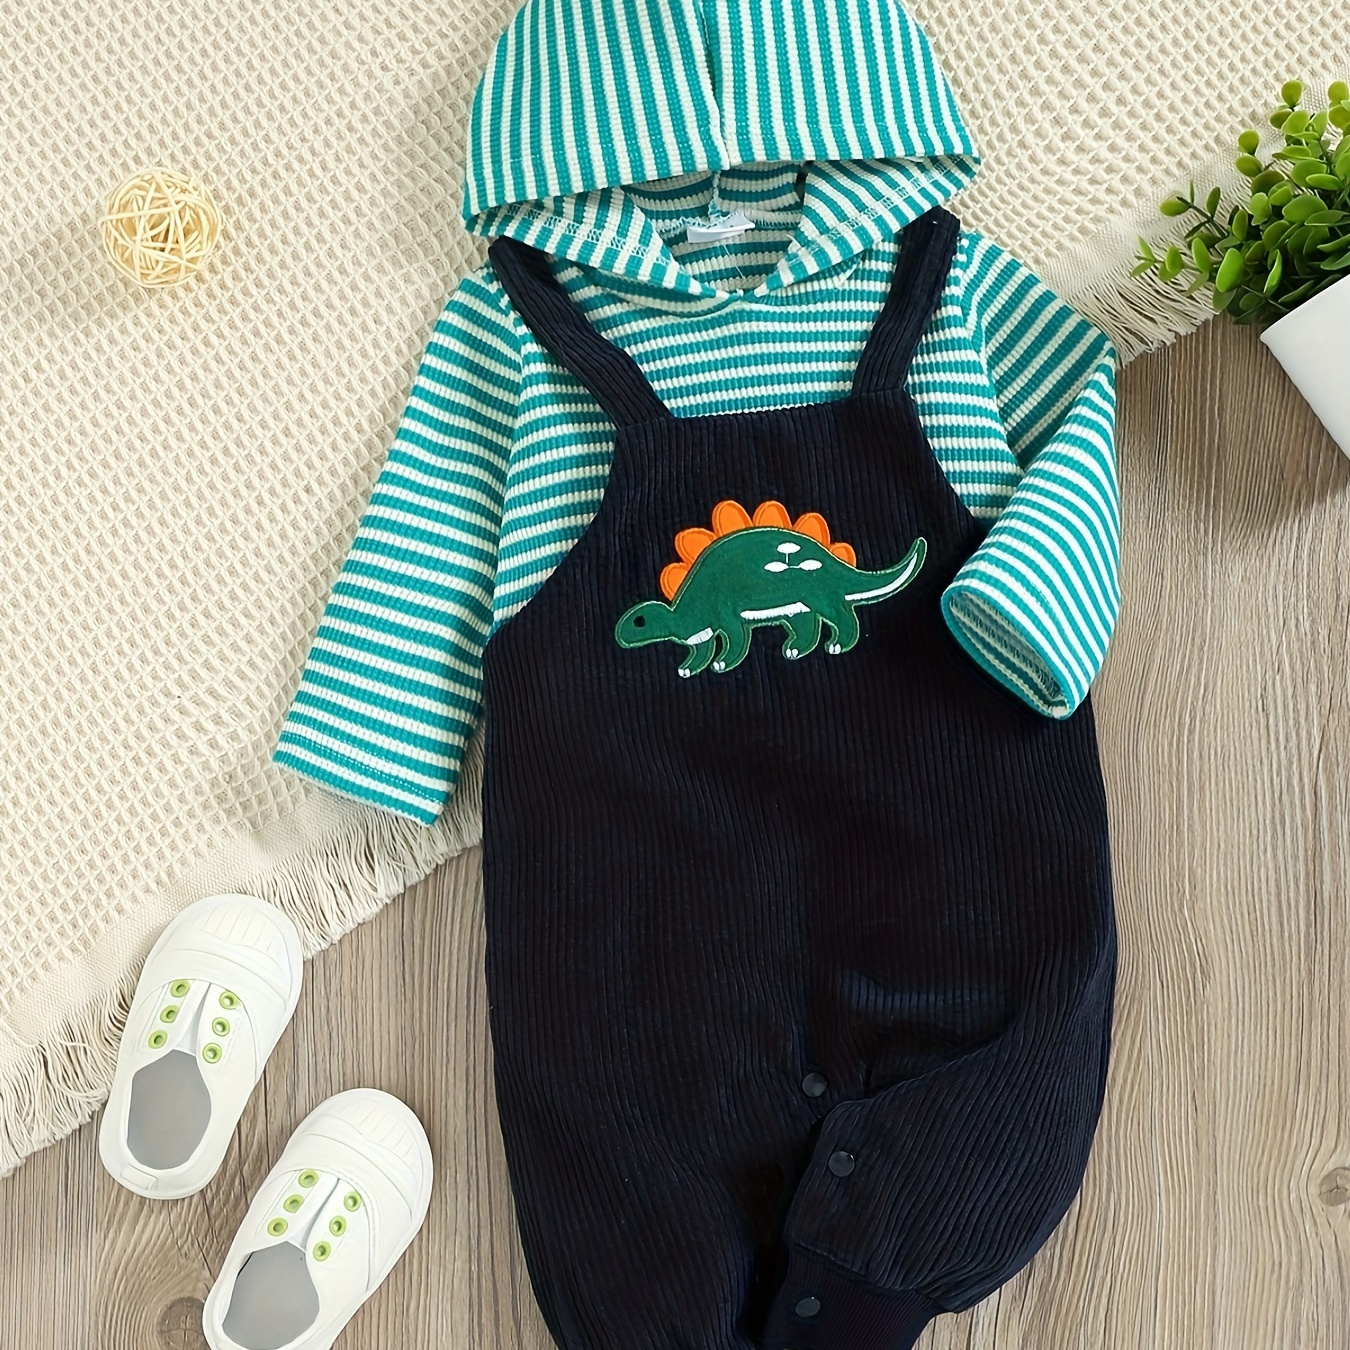 

Baby's Cute Long Sleeve Dinosaur Graphic Jumpsuit, Toddler's Cotton Fall/winter Romper Ribbed Hoodie Clothing 0-18 Months